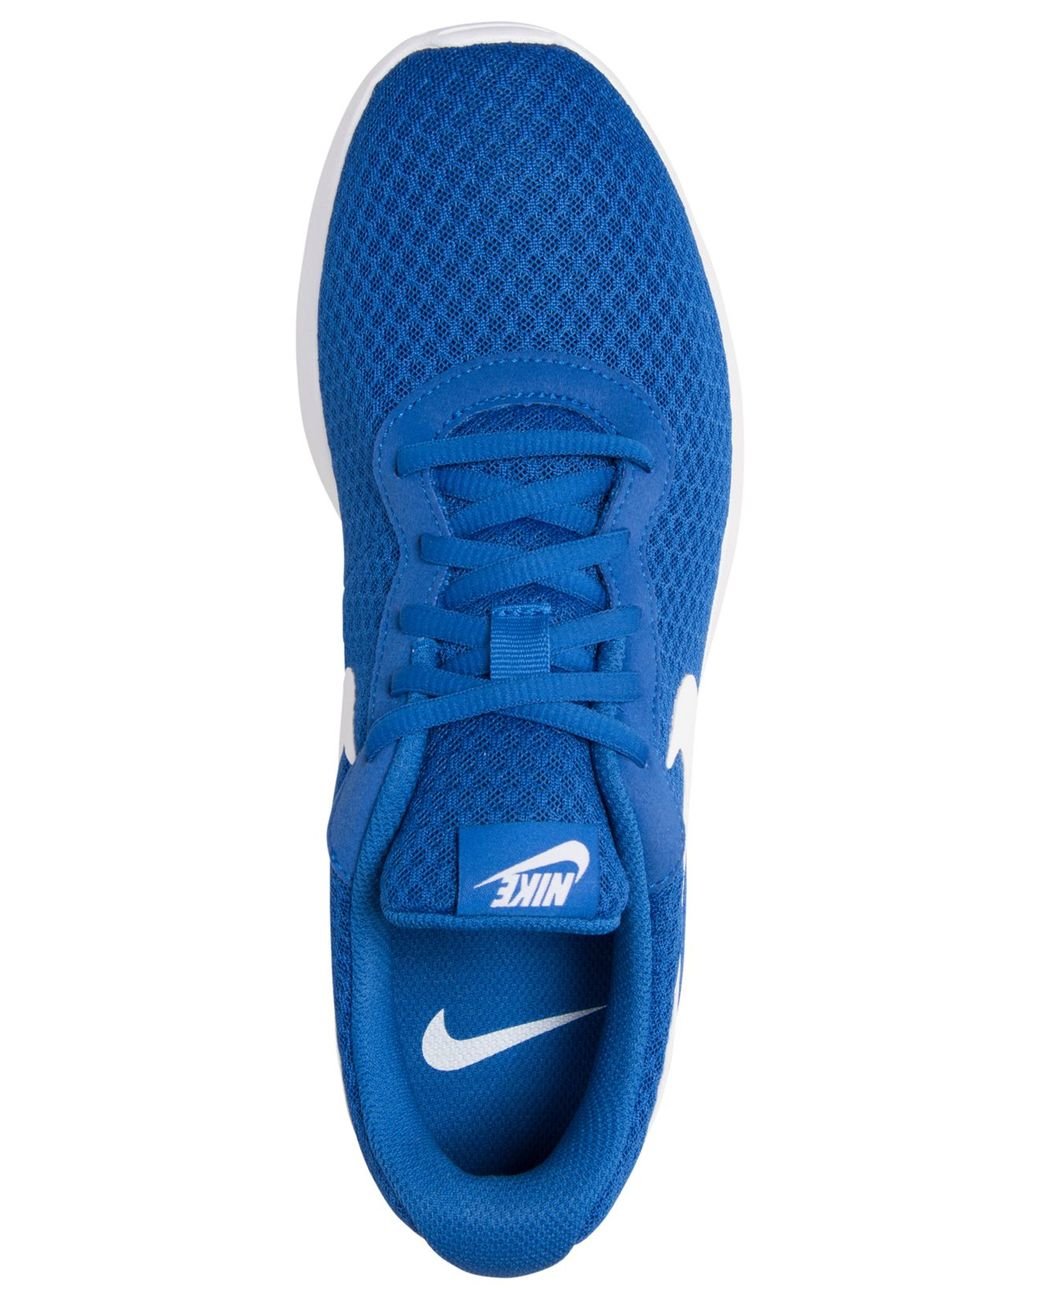 Nike Casual Shoes - Buy Nike Casual Shoes Online at Best Prices In India |  Flipkart.com